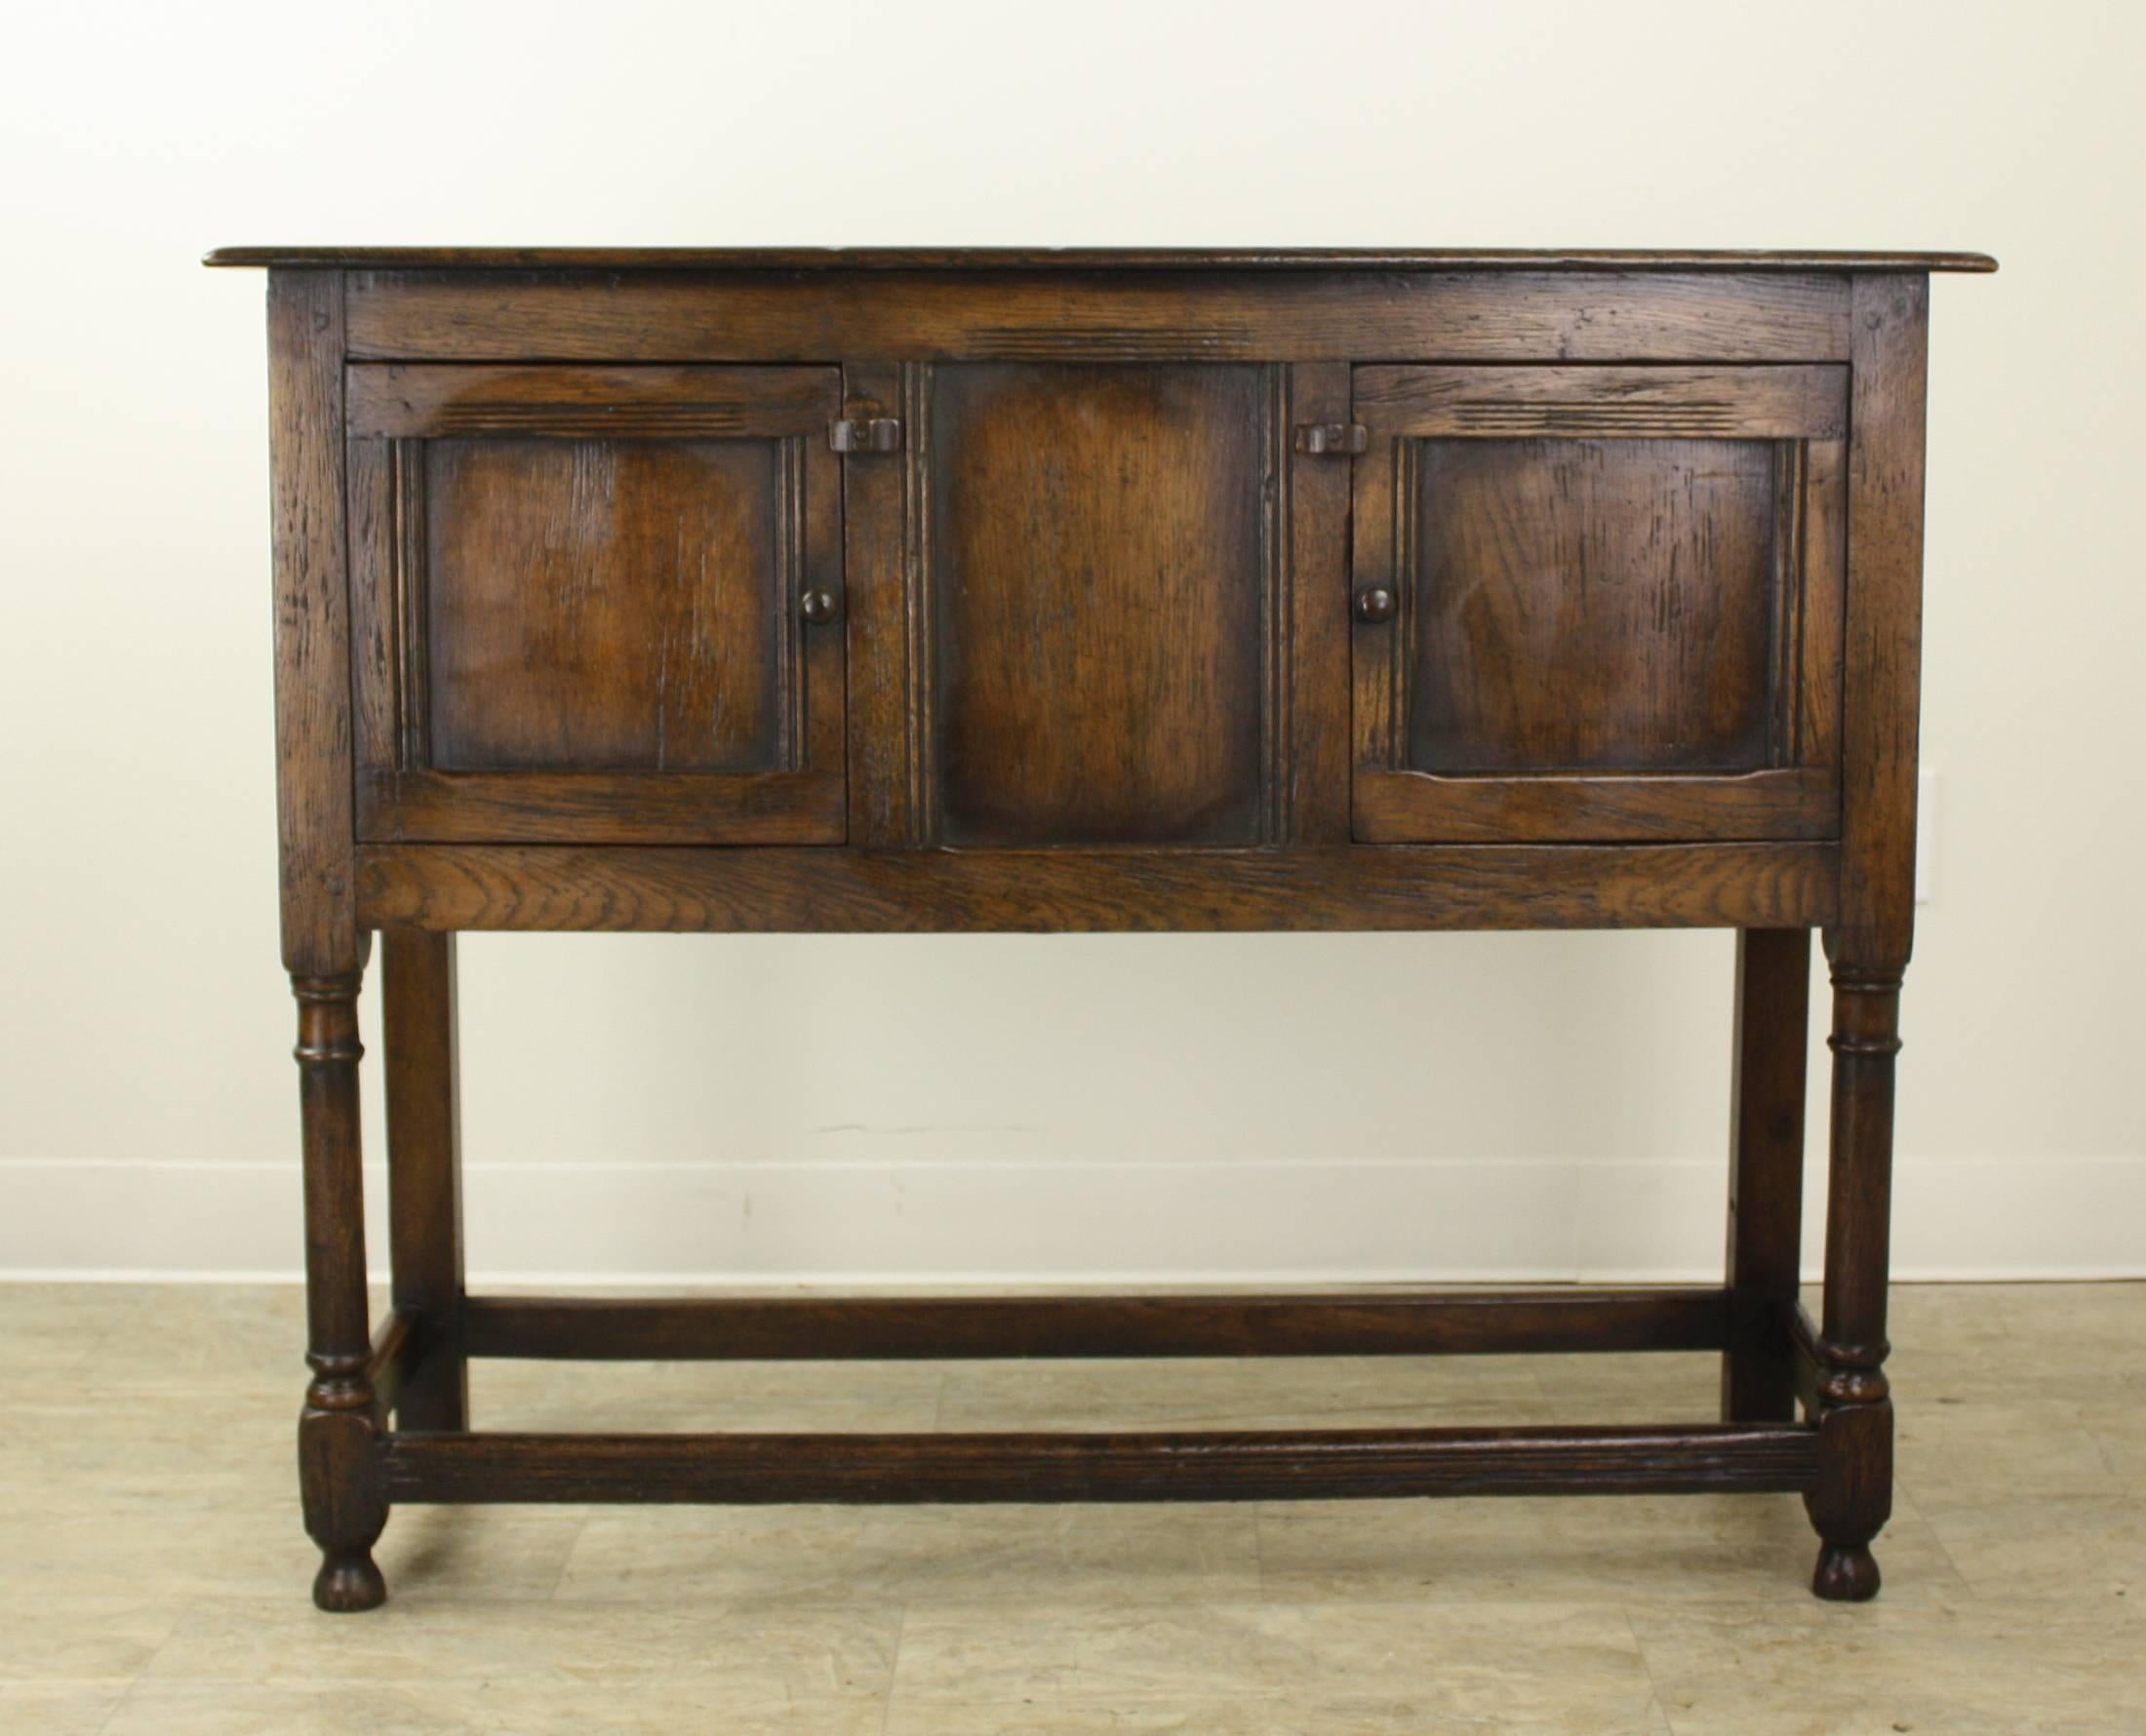 A charming English oak server with a stretcher base, simple latch closures, and inset panels on the doors and sides. Rich color and lovely patina complete the look. Very sturdy. The doors open and shut easily and the top is in very good condition